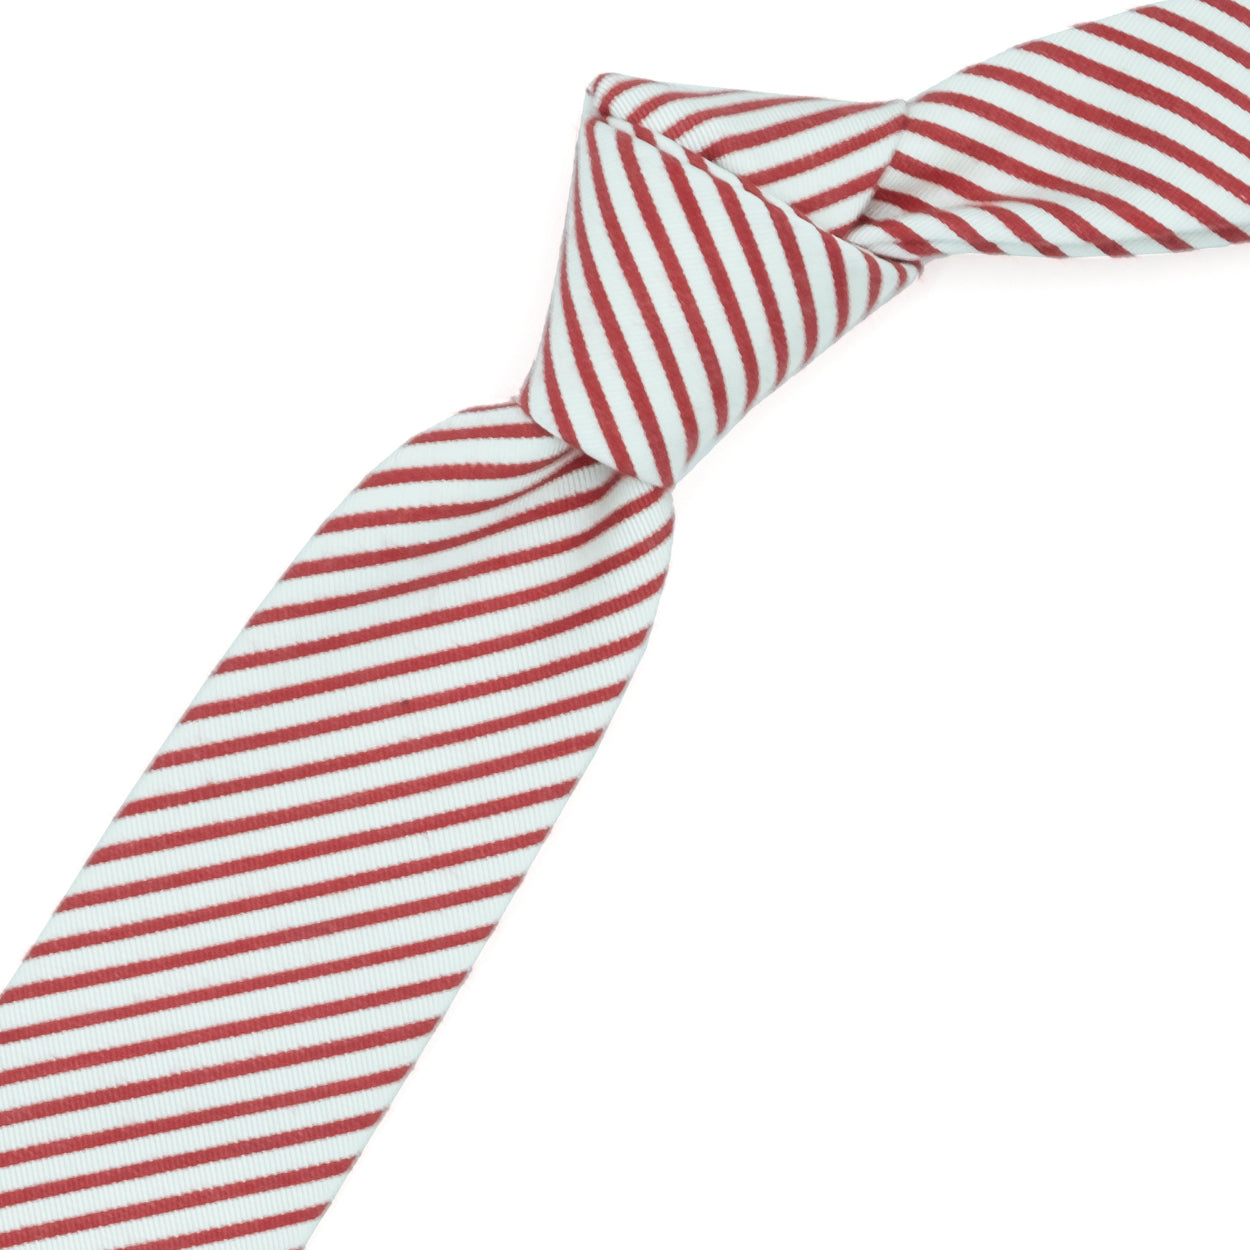 Cream tie with red stripes